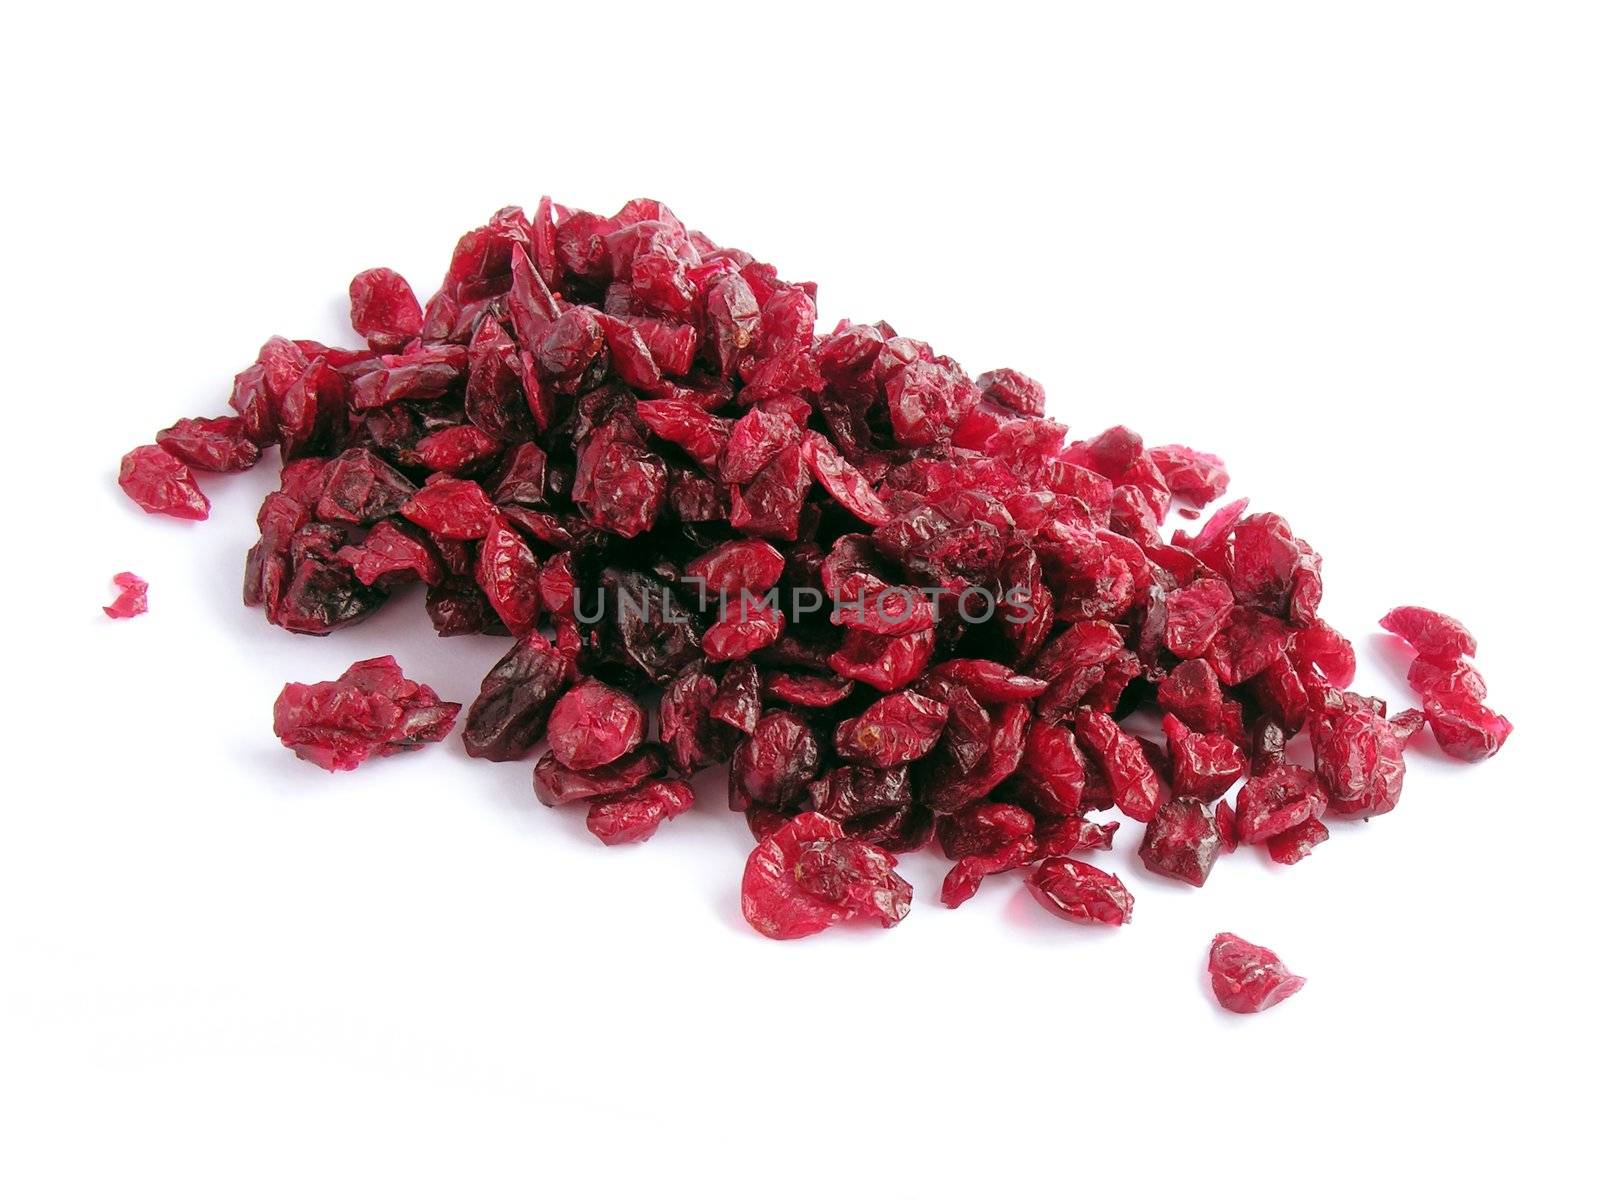 canberry dry fruits by RAIMA